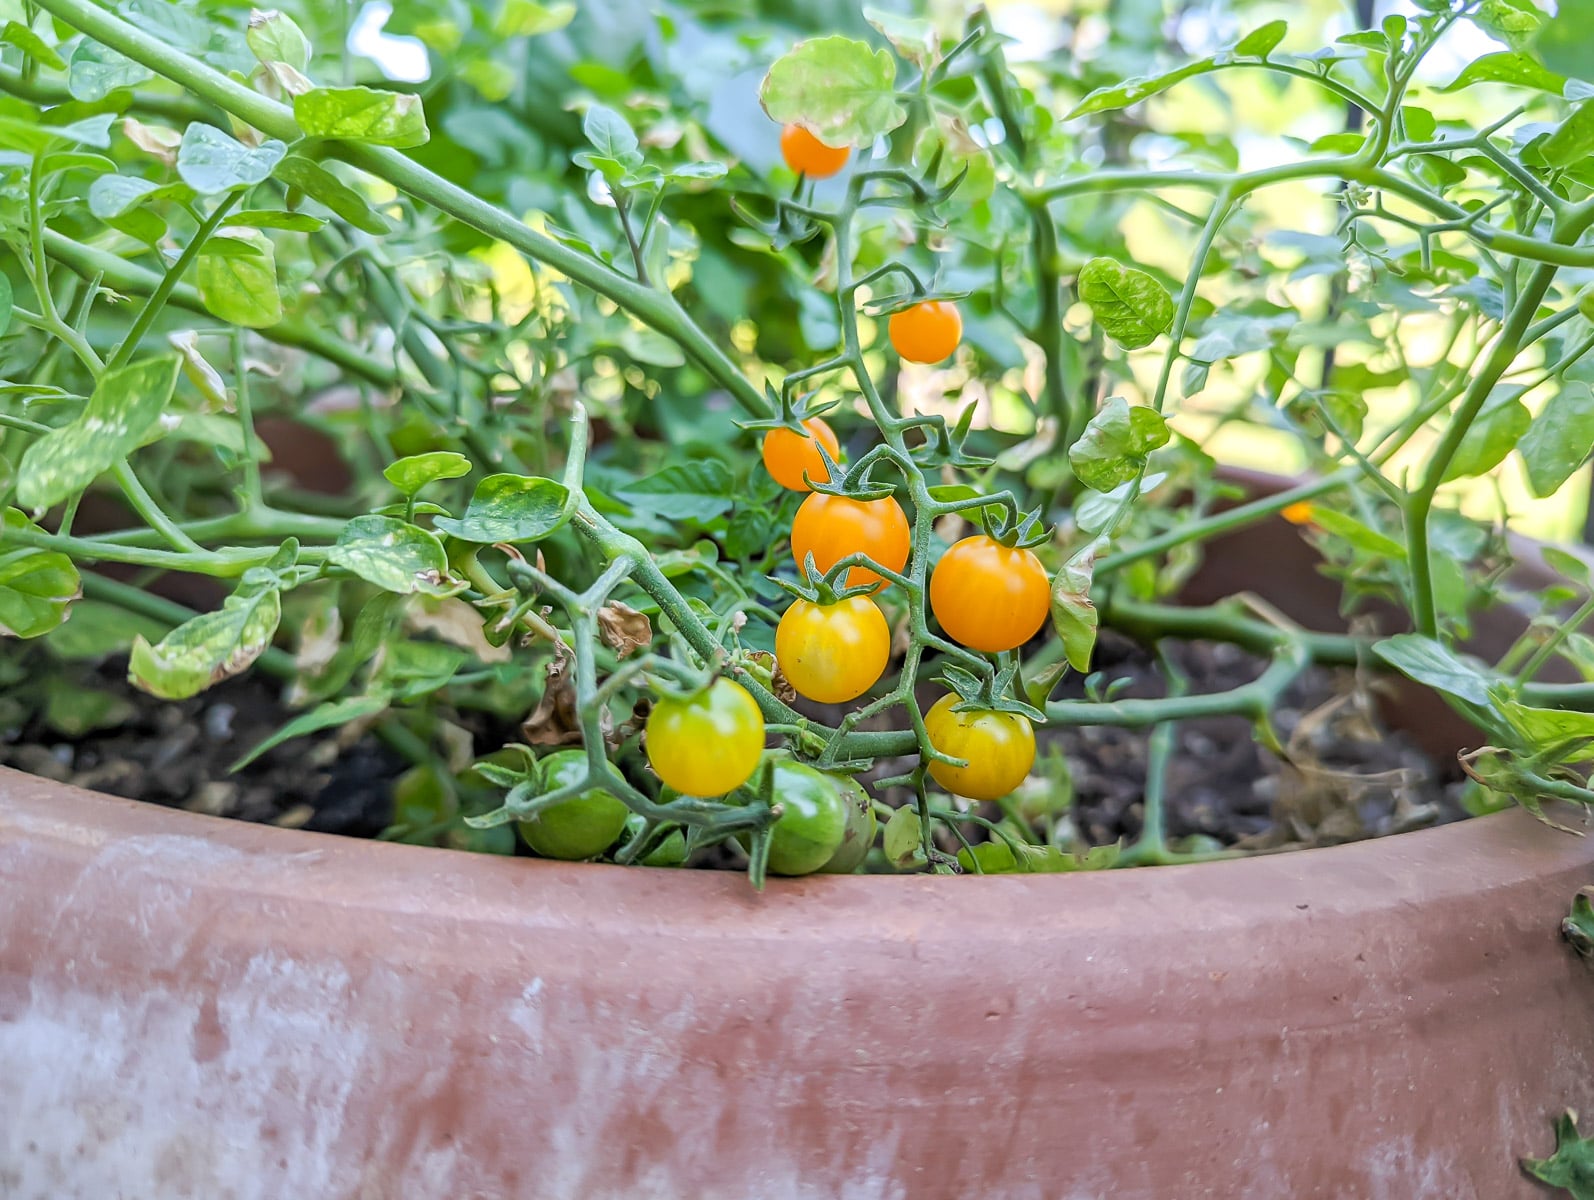 Patio Tomatoes: What & How to Grow